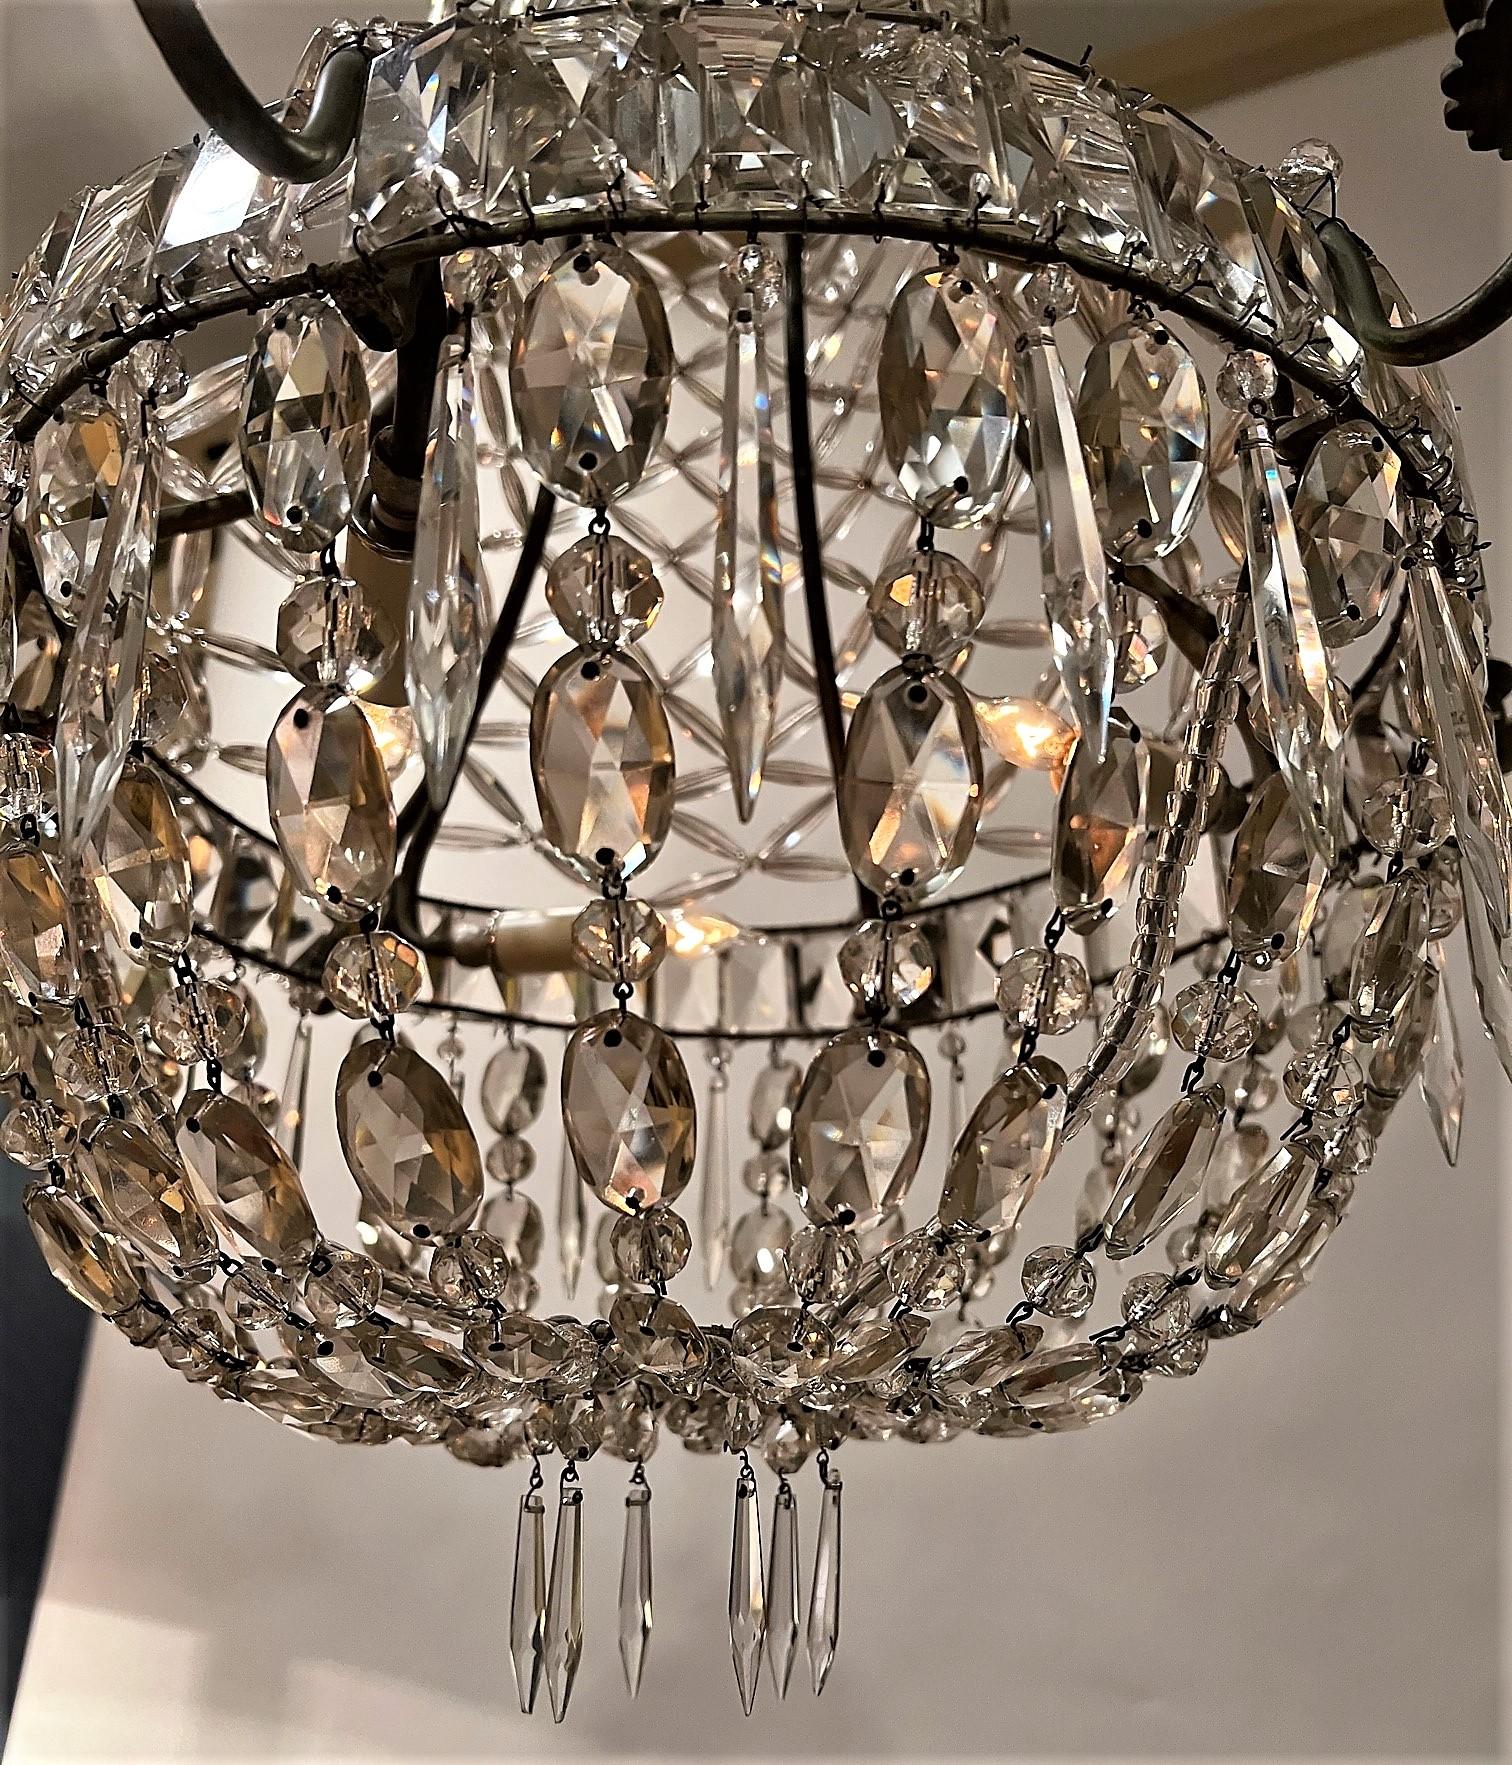 Neo-Classic Style Crystal 9-Light Chandelier, Italy, Circa:1905 For Sale 1